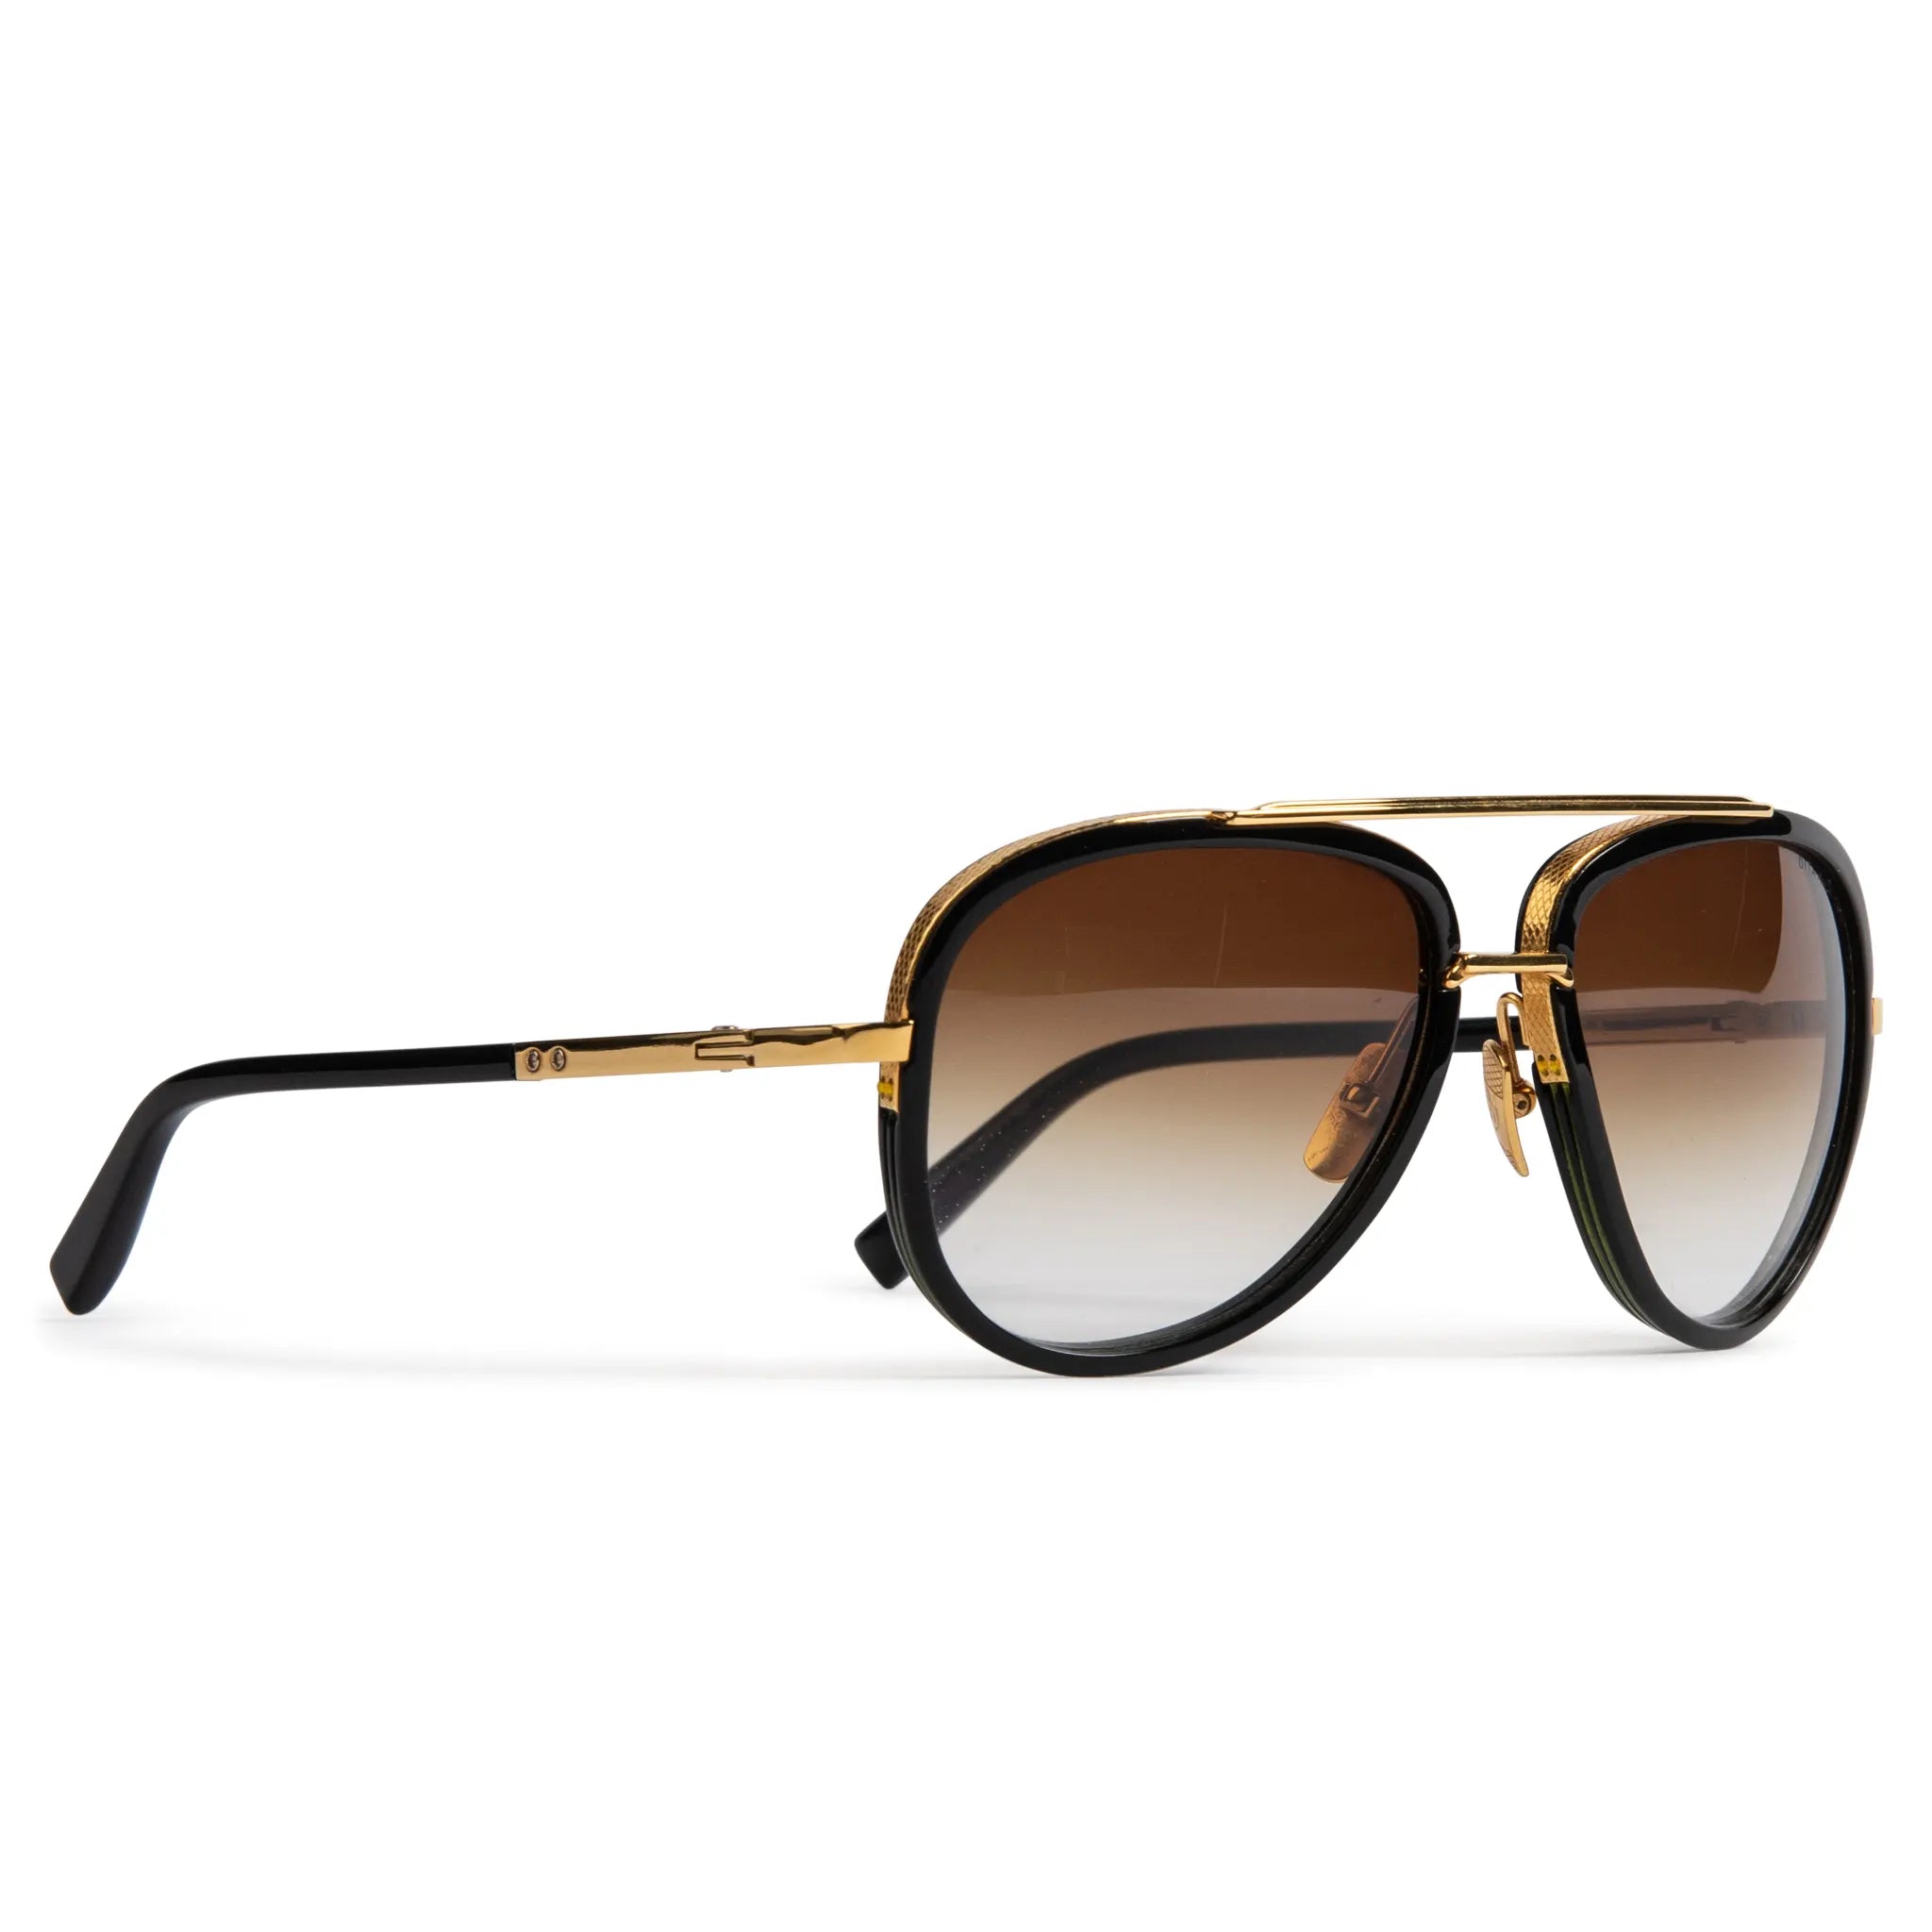 Front side view of Preloved - Dita Eyewear Mach Two Black Gold Sunglasses DRX-2031B-60